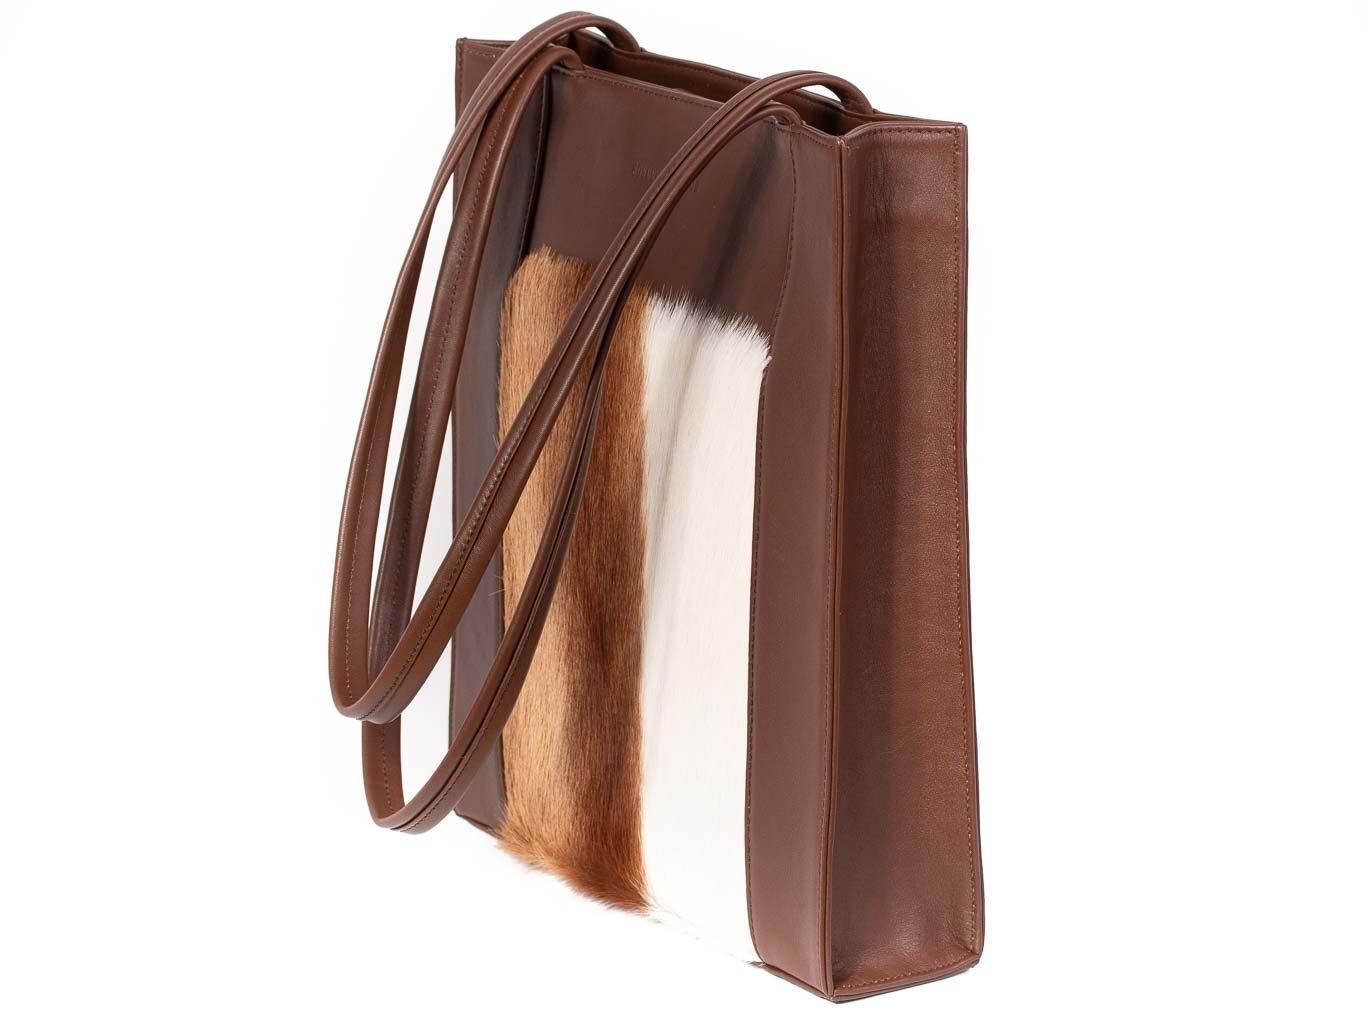 Tote Springbok Handbag in Cocoa Brown with a stripe feature by Sherene Melinda front handle